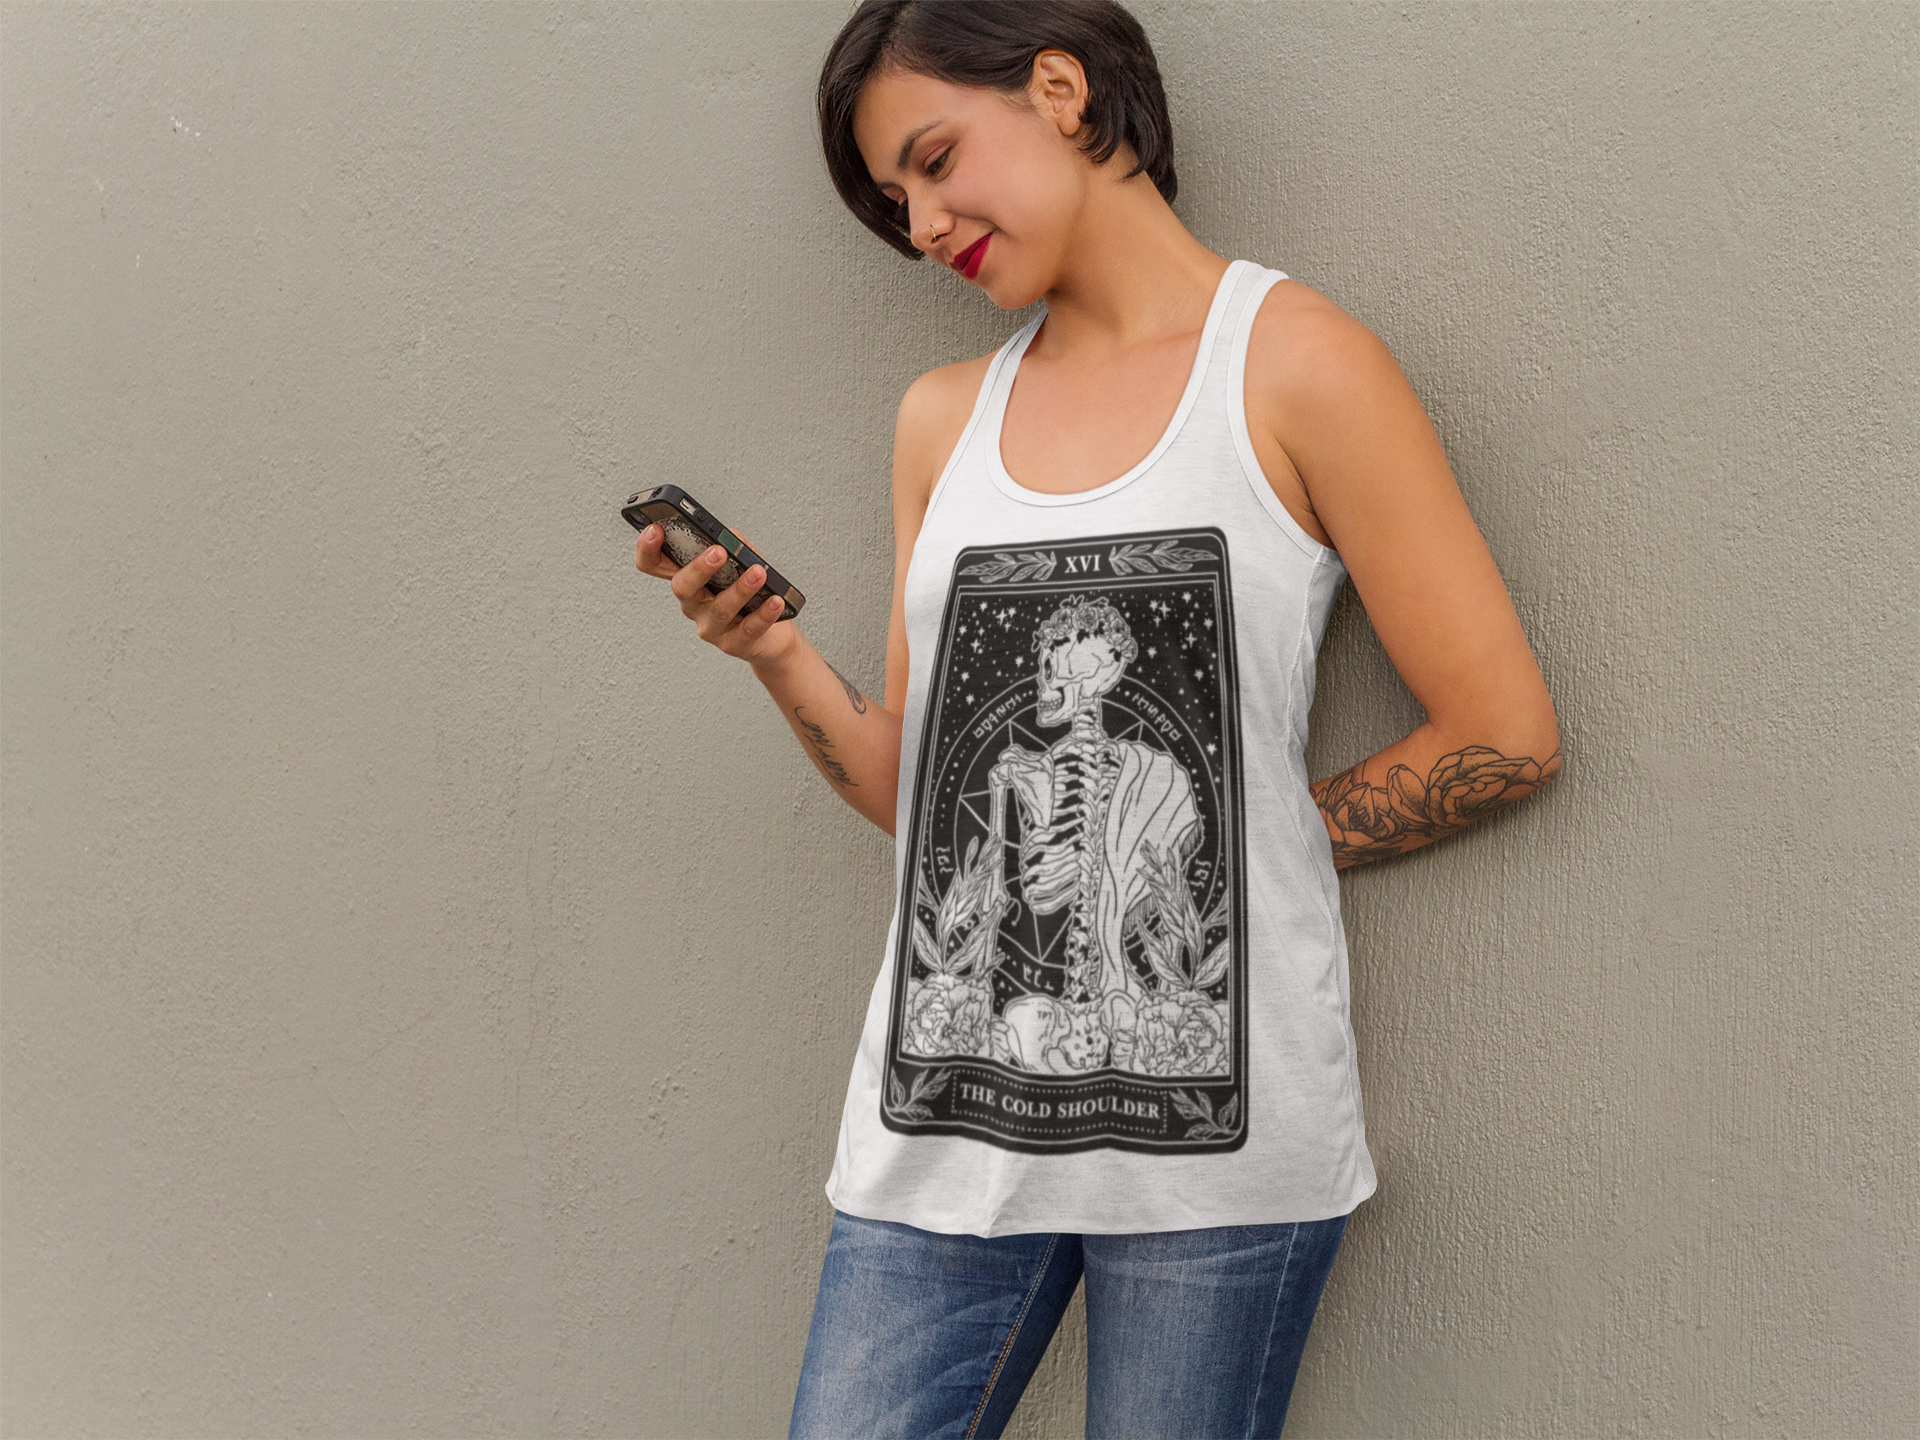 « THE COLD SHOULDER » WOMEN'S SLOUCHY or RACERBACK TANK